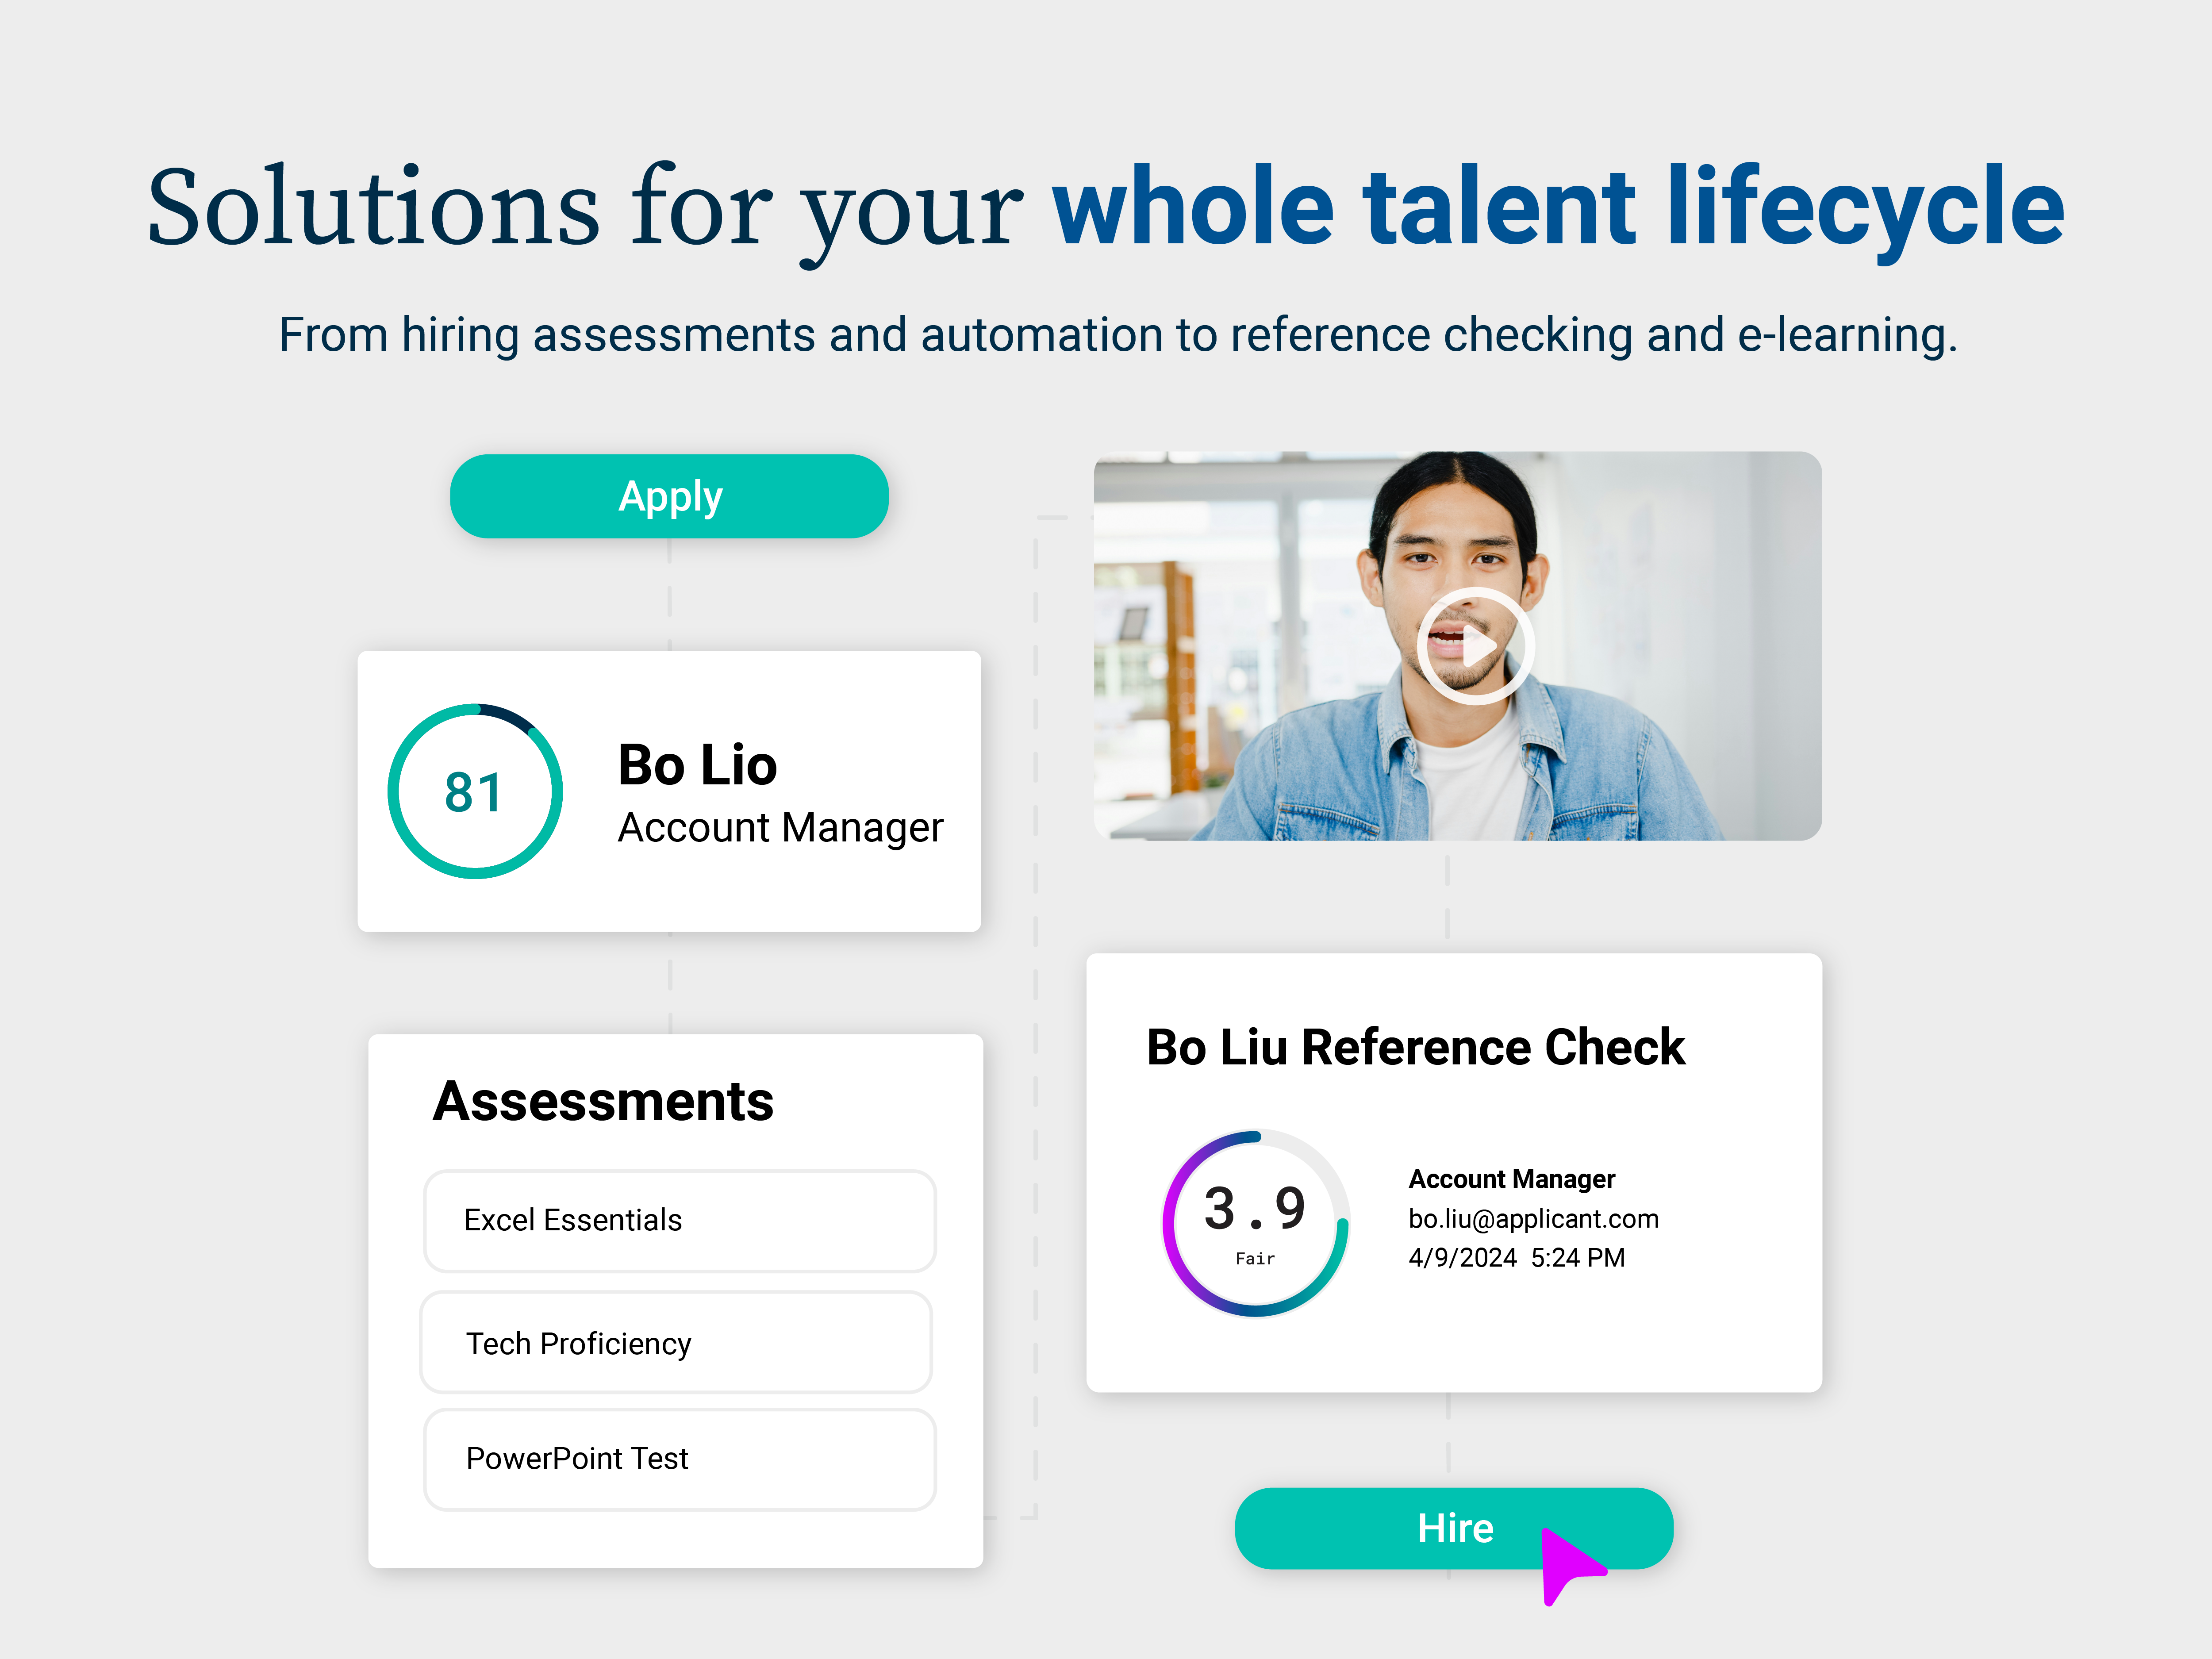 Backed by Cangrade's award-winning support, we deliver:
- Hiring Automation
- Pre-Hire Soft Skills Assessments
- Hard Skills Assessment Library
- Candidate Reports
- Multi-Way Scoring
- Structured Interview Guides
- Video Interviewing
- Reference Checking